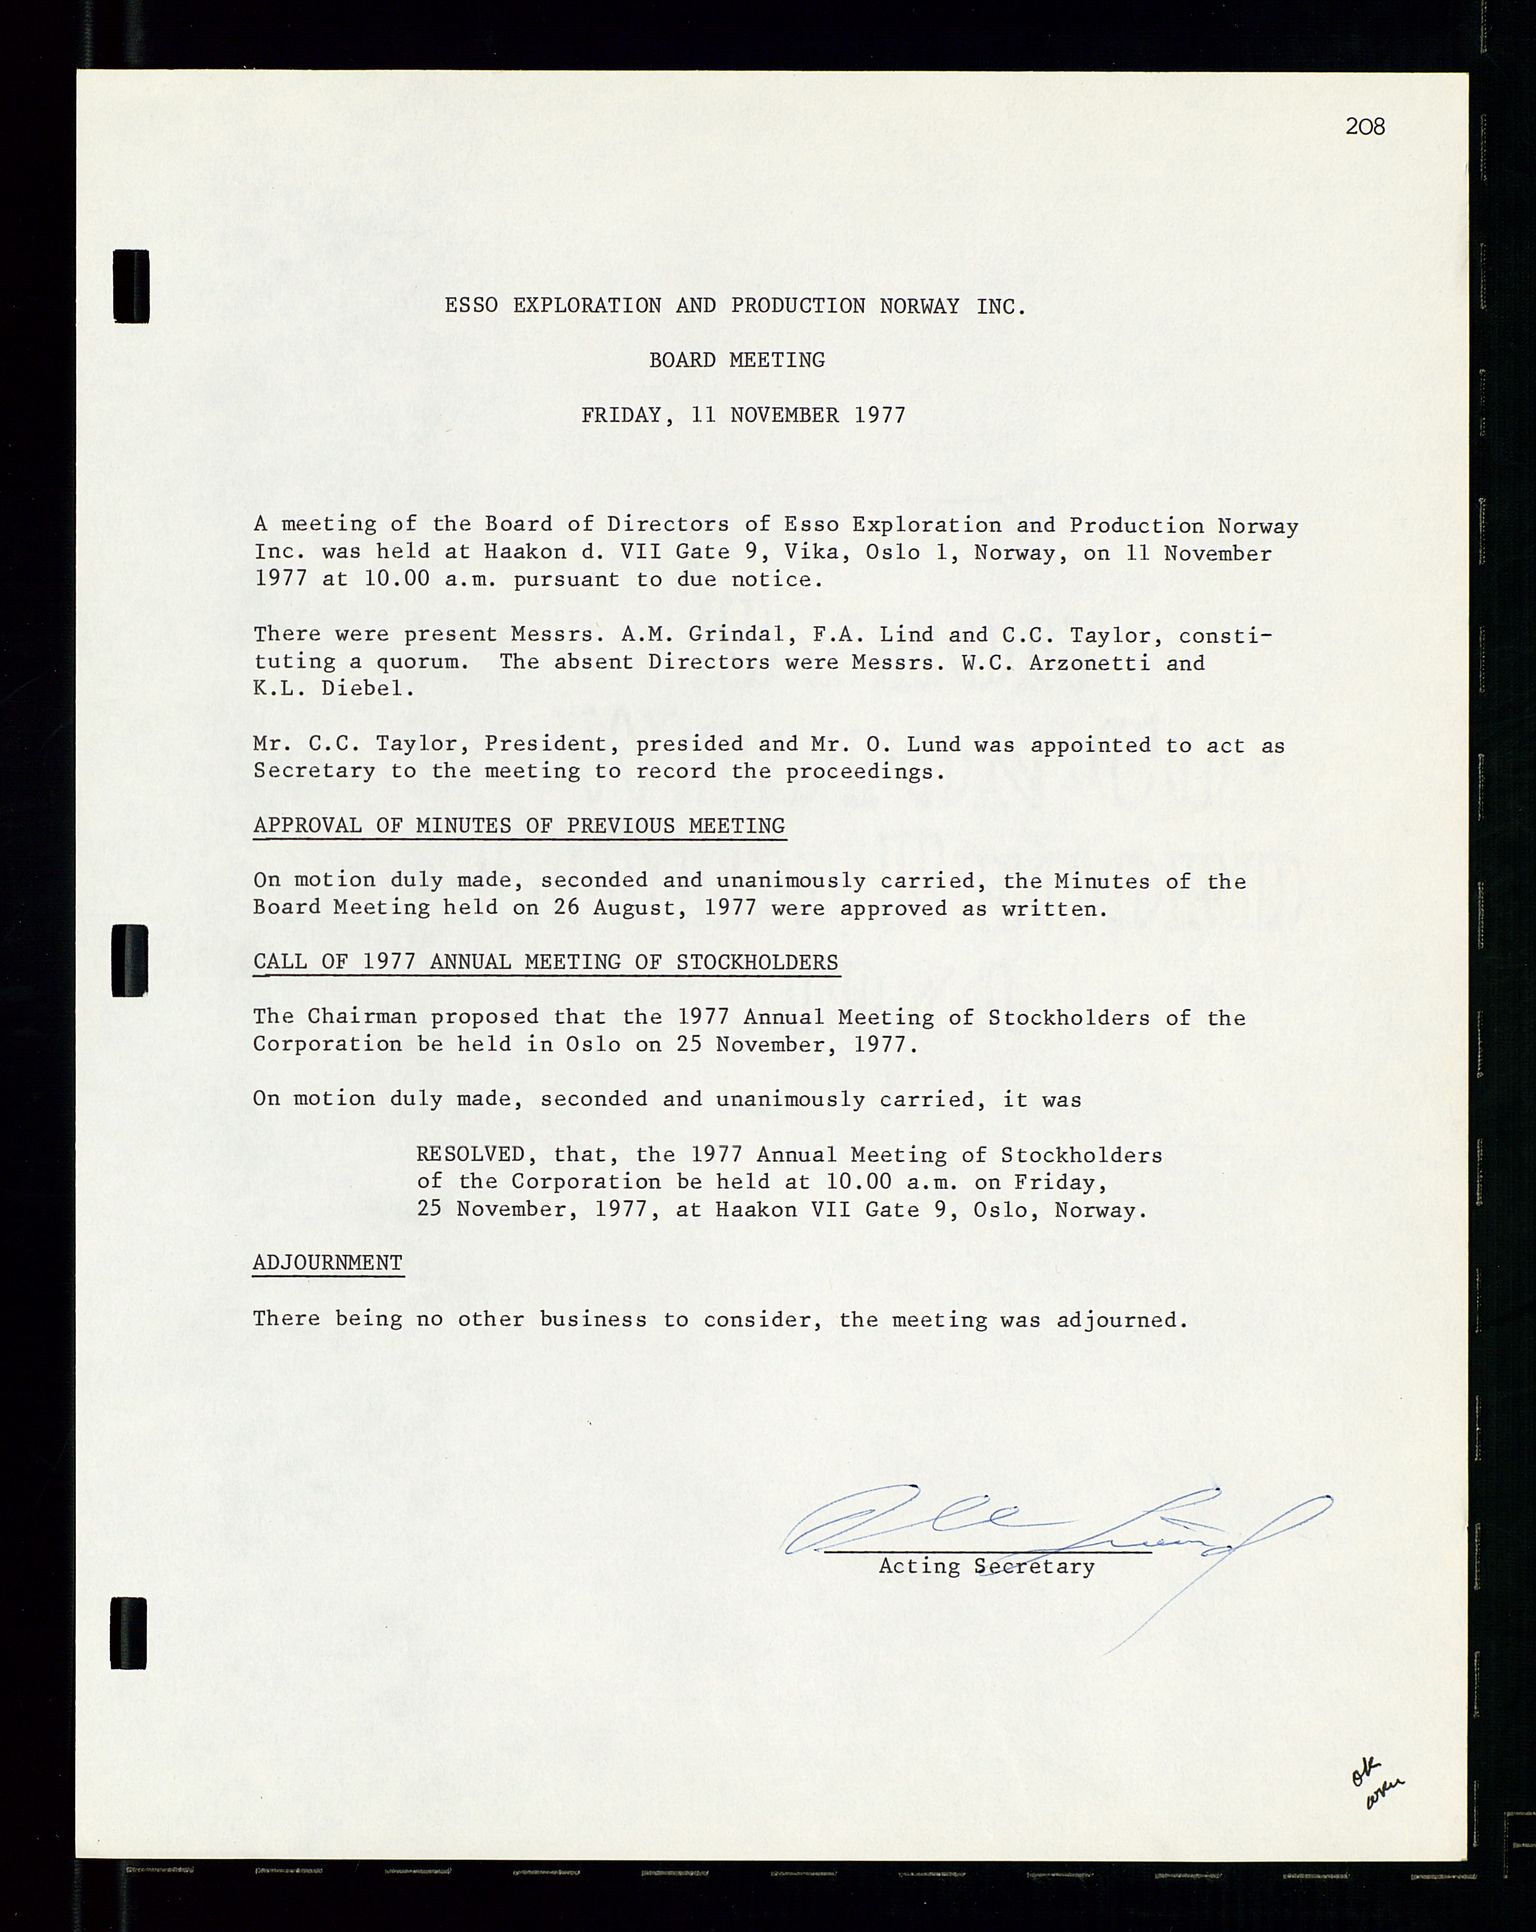 Pa 1512 - Esso Exploration and Production Norway Inc., SAST/A-101917/A/Aa/L0001/0002: Styredokumenter / Corporate records, Board meeting minutes, Agreements, Stocholder meetings, 1975-1979, p. 63